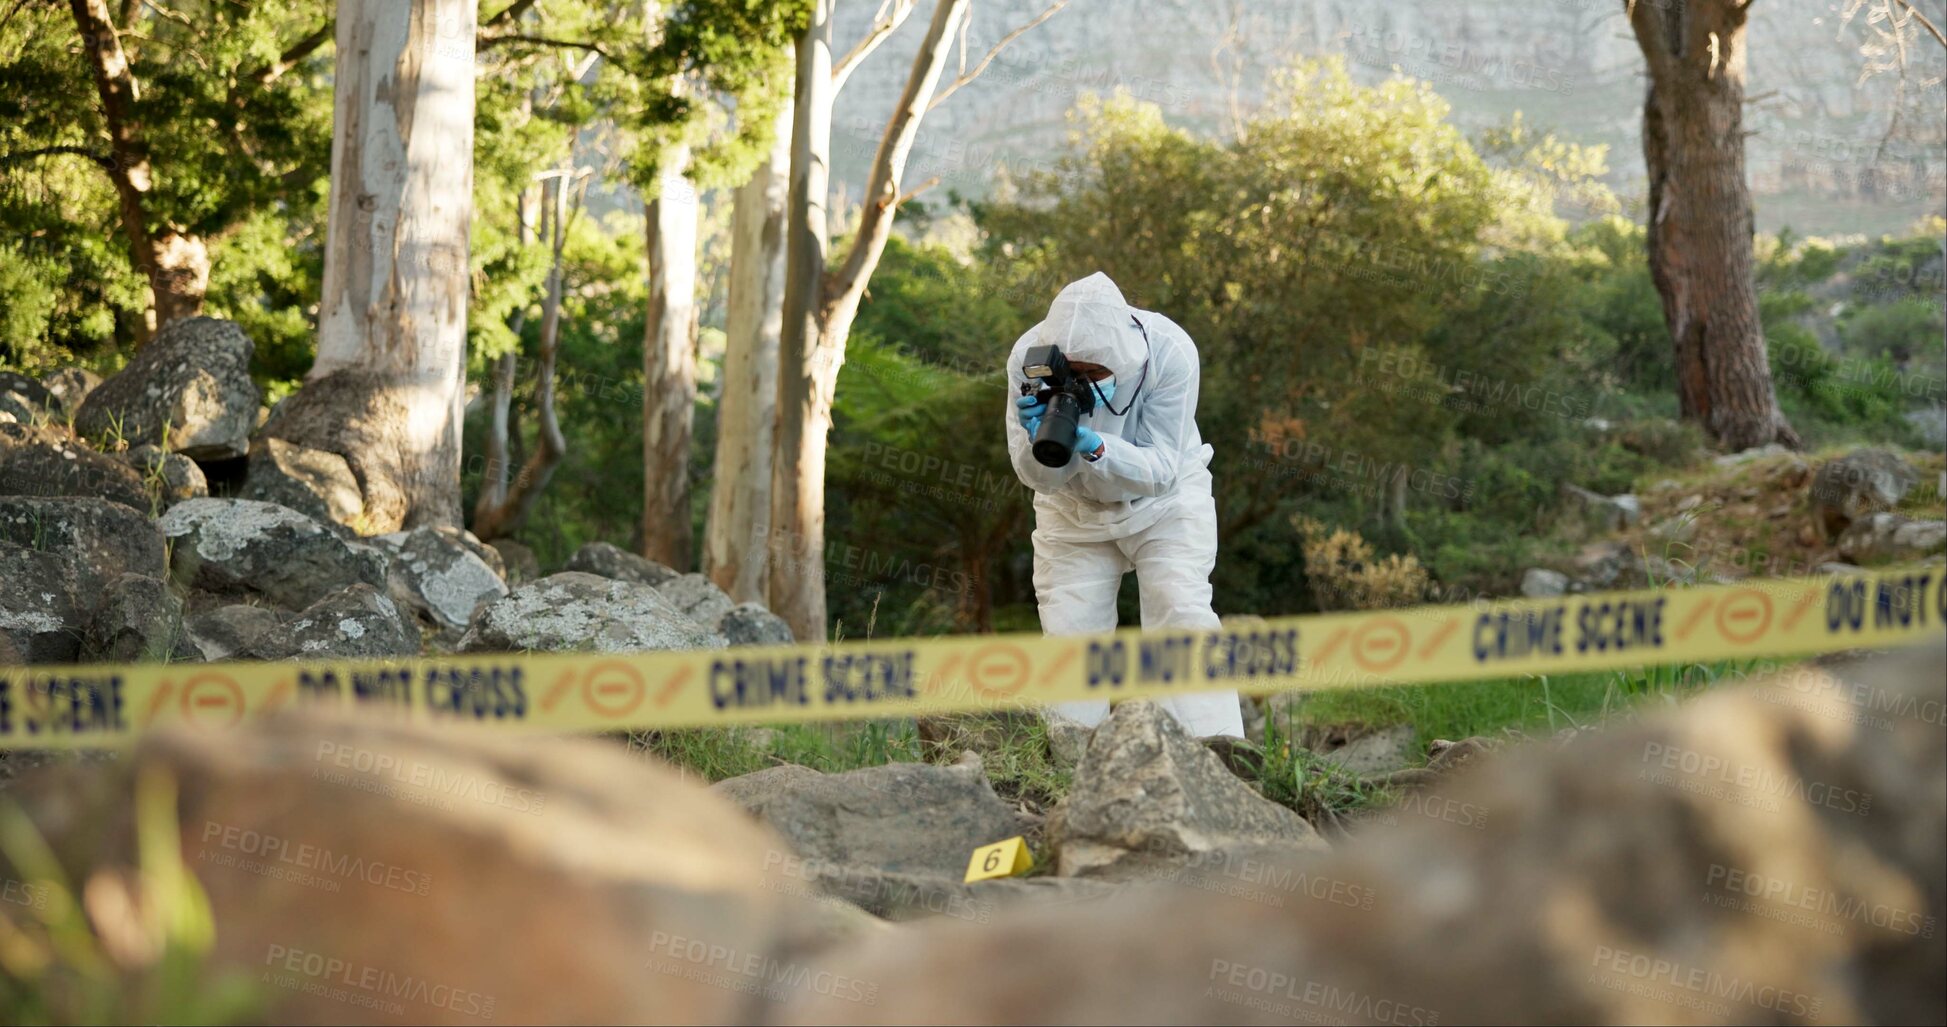 Buy stock photo Forensic, photographer and evidence at crime scene for investigation in forest with police tape and safety hazmat.
Csi quarantine, expert investigator and pictures for observation and case research